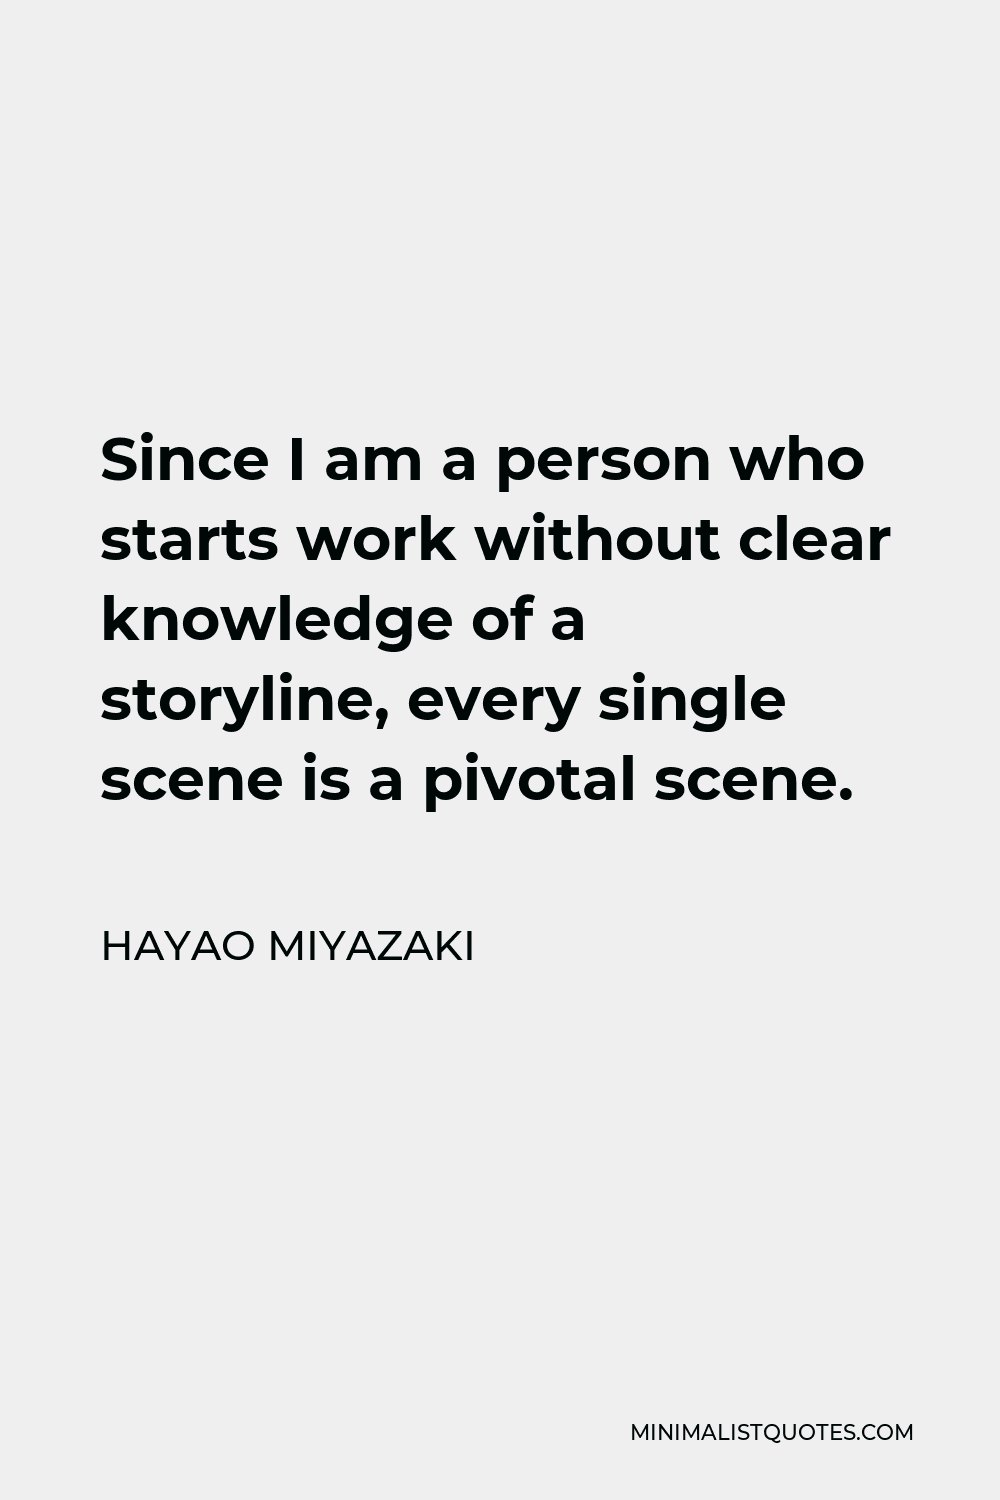 Hayao Miyazaki Quote: Since I am a person who starts work without ...